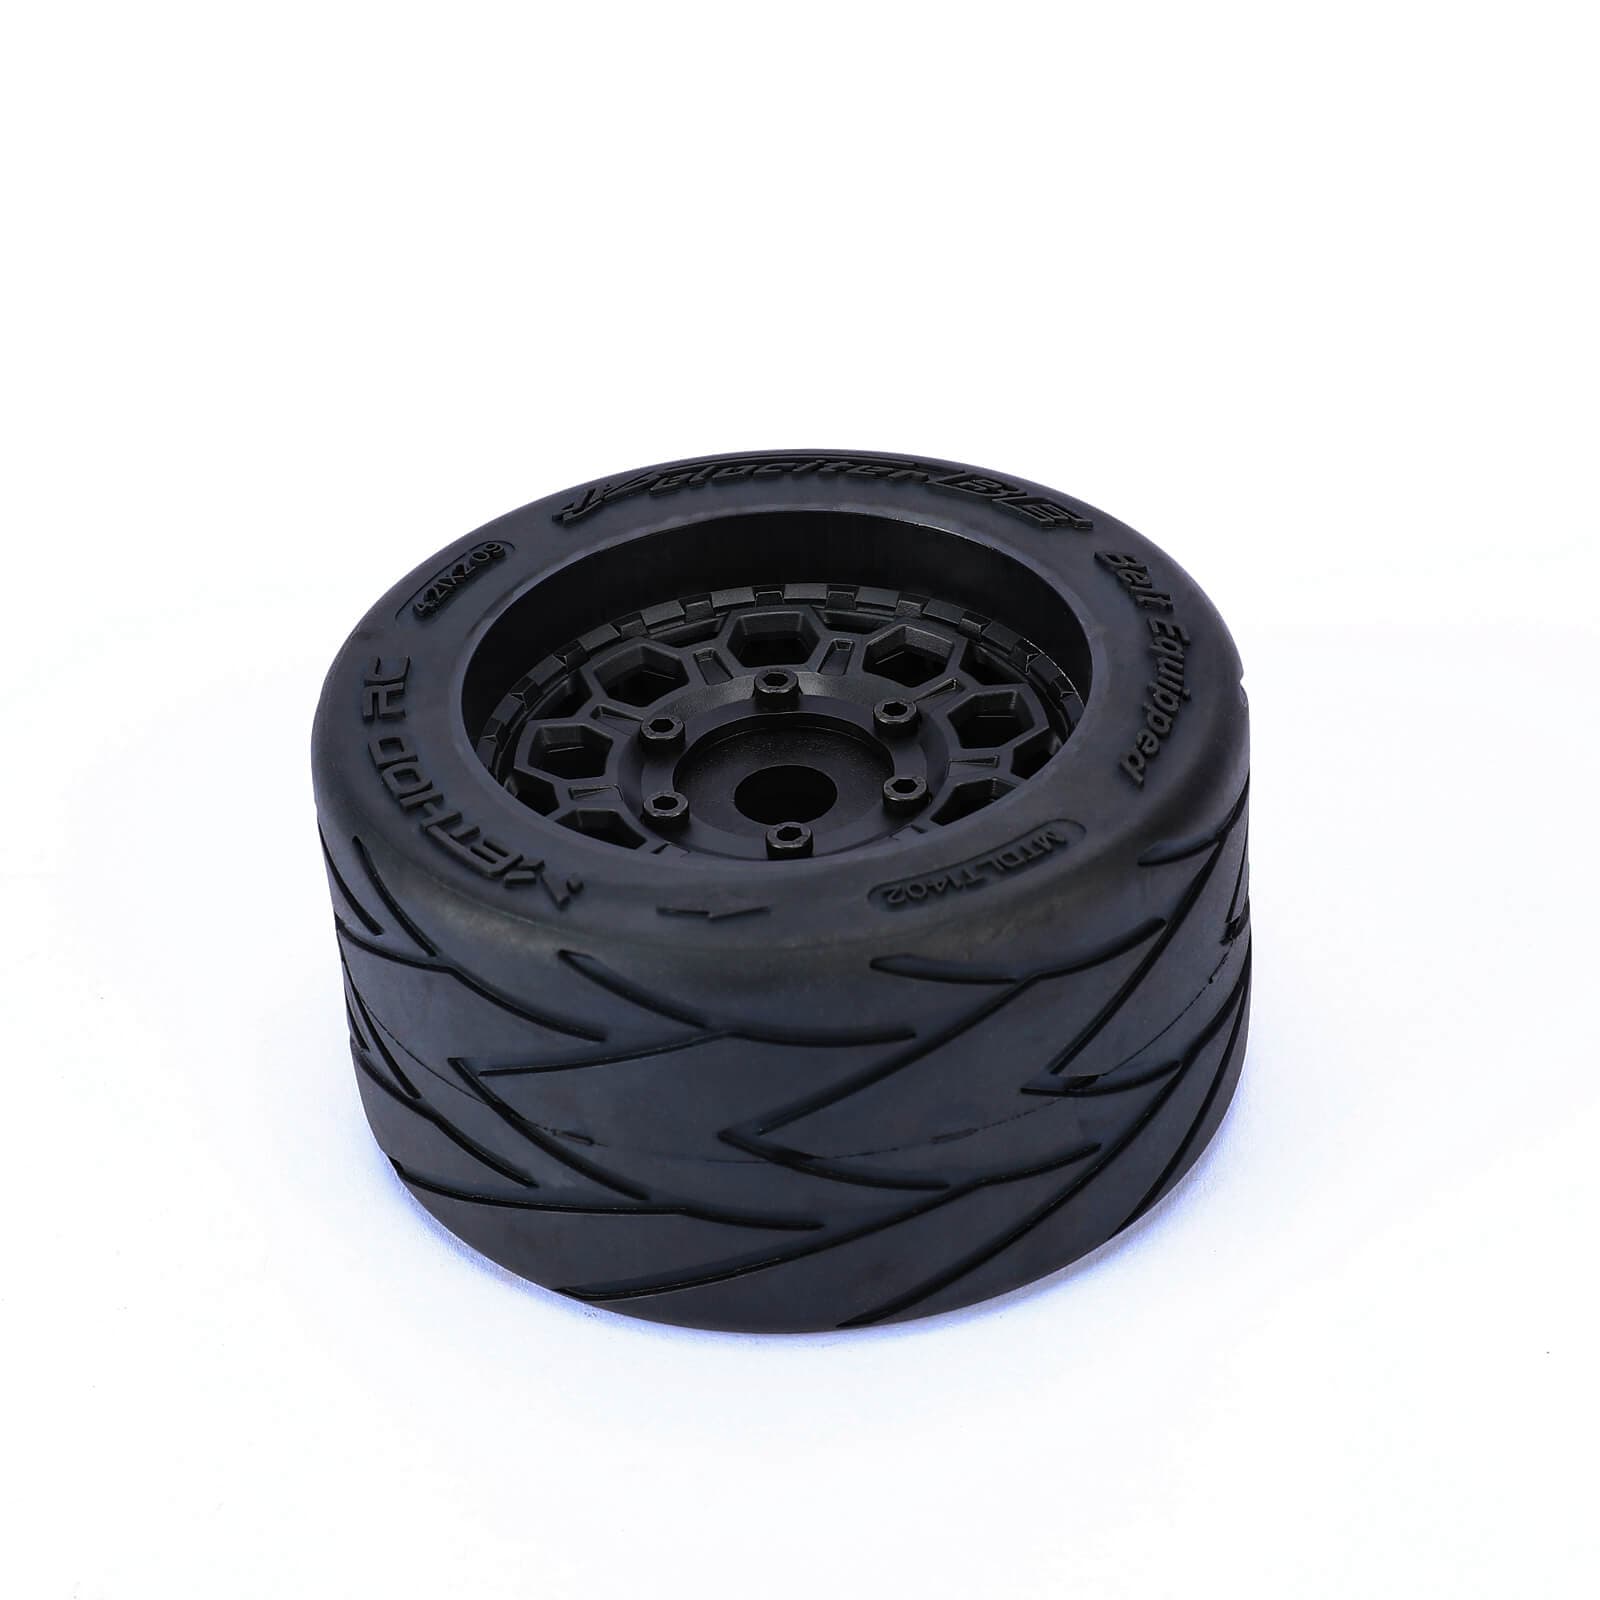 Method RC Tire and Wheel Velociter Belted 1/7th On-Road Tires on Hive 17mm Hex Wheels, Felony Rear, 54/106 (2pcs, Glued)